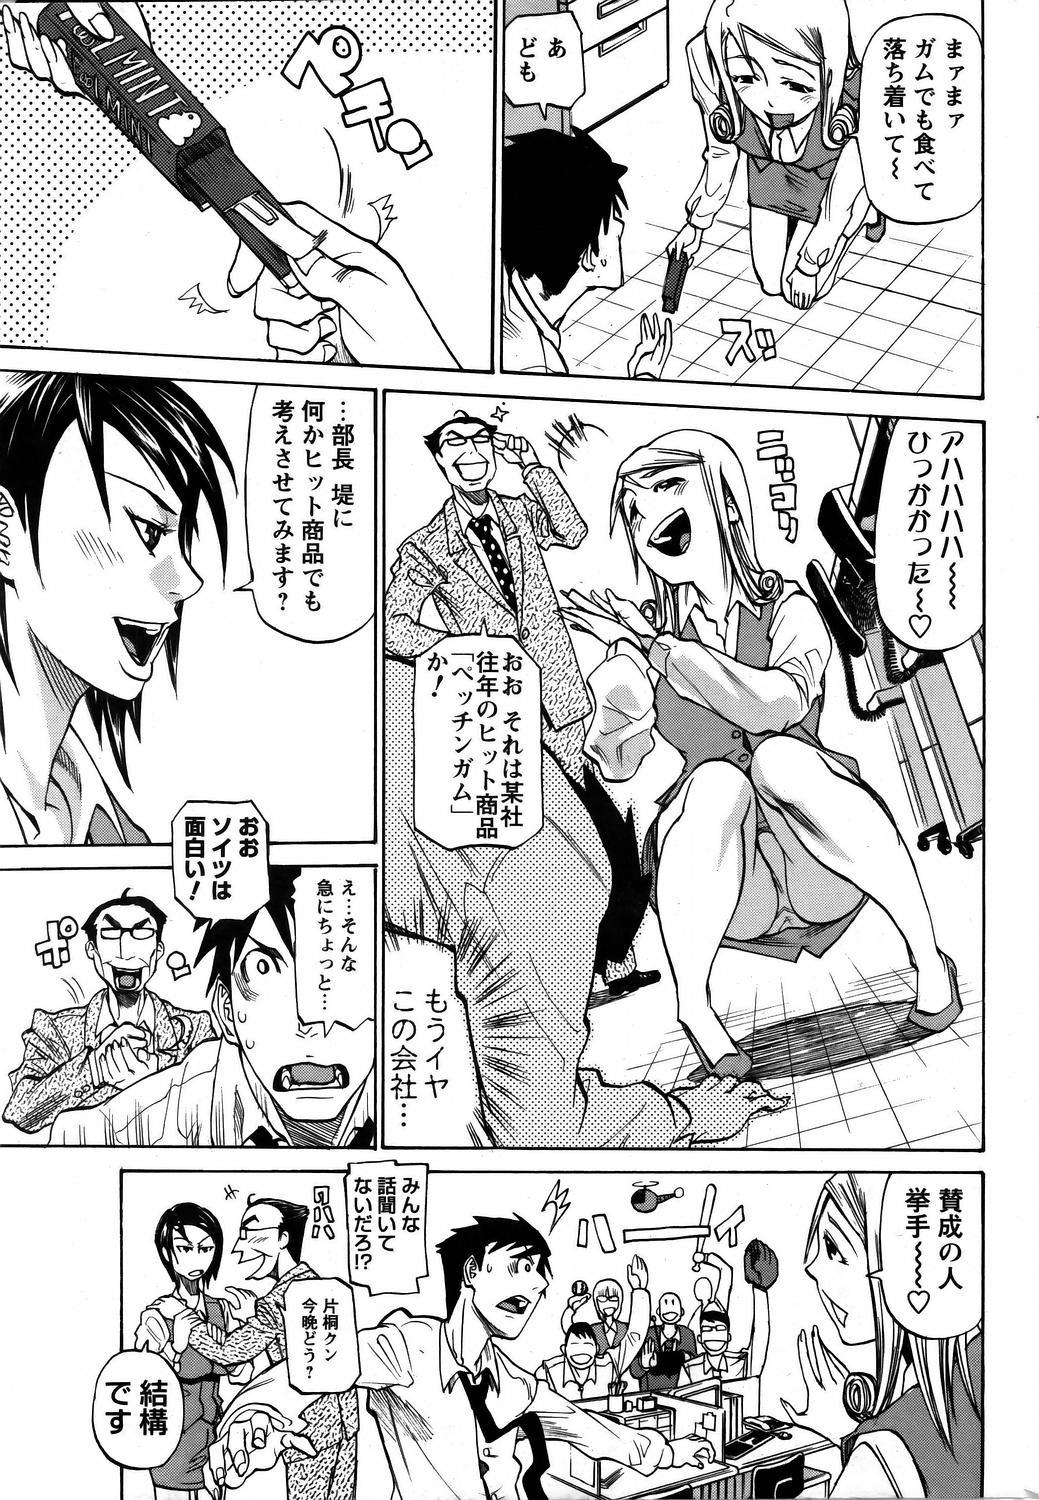 Exhibition 進め！お気楽カンパニー Brother Sister - Page 5